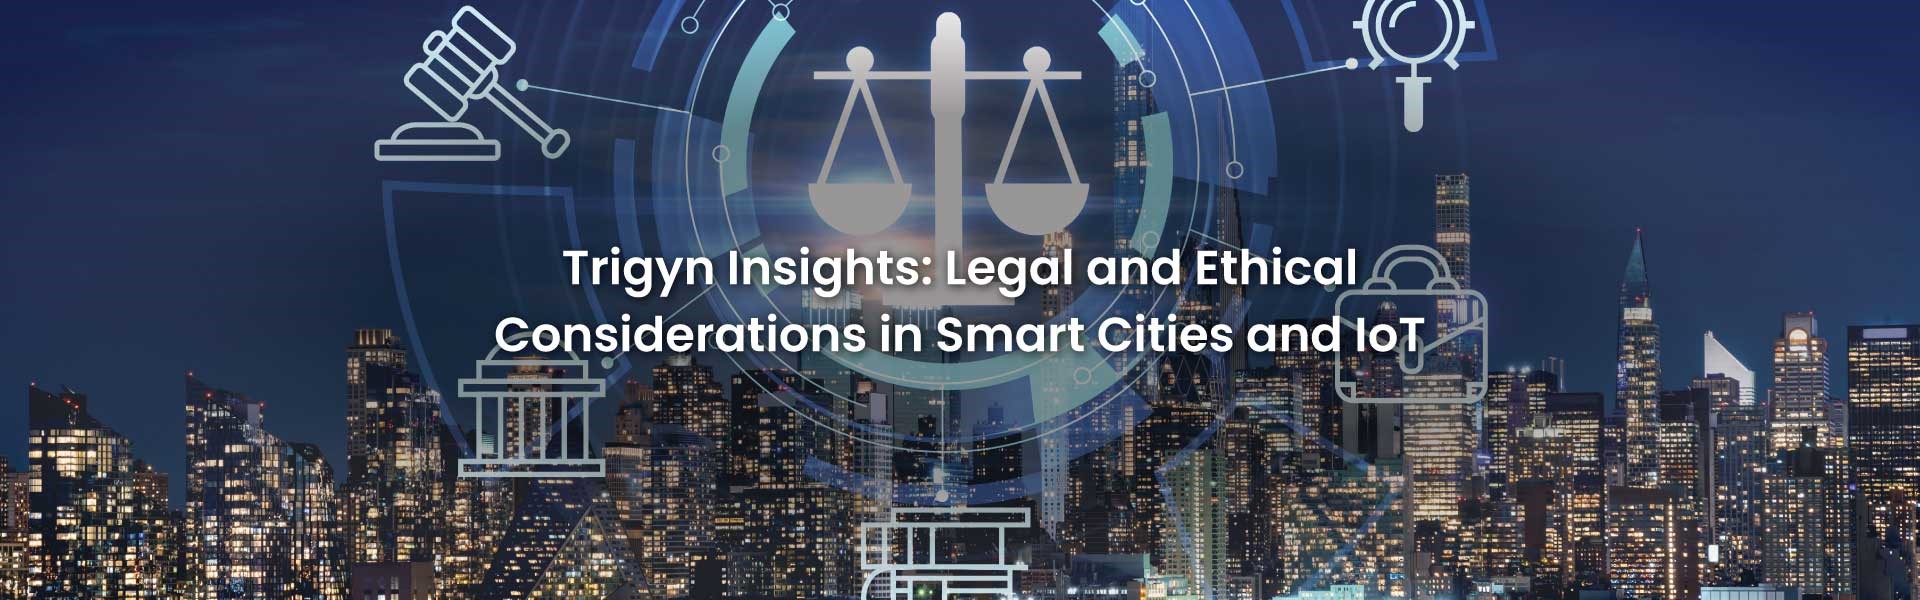 Ethical Considerations in Smart Cities and IoT